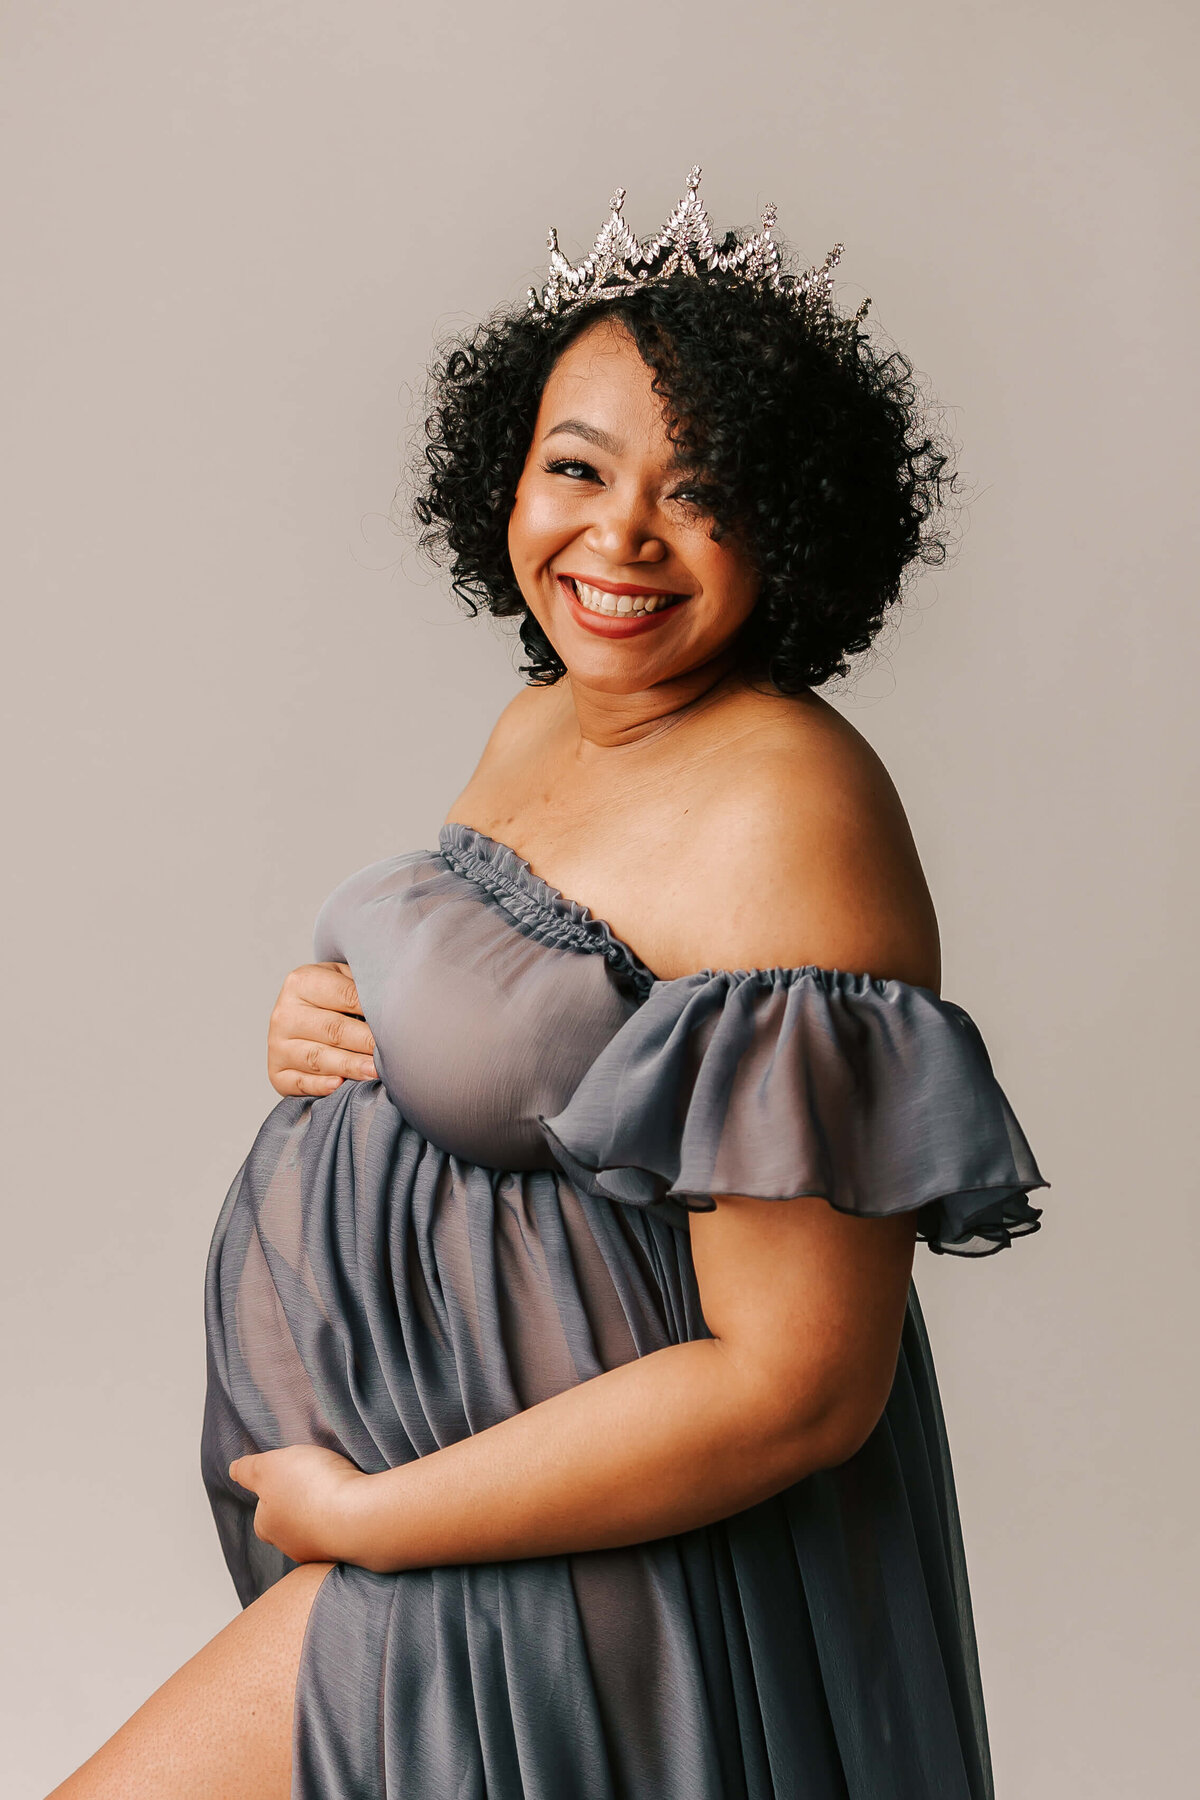 mom wearing blue dress and crown smiling for maternity portrait in portland studio